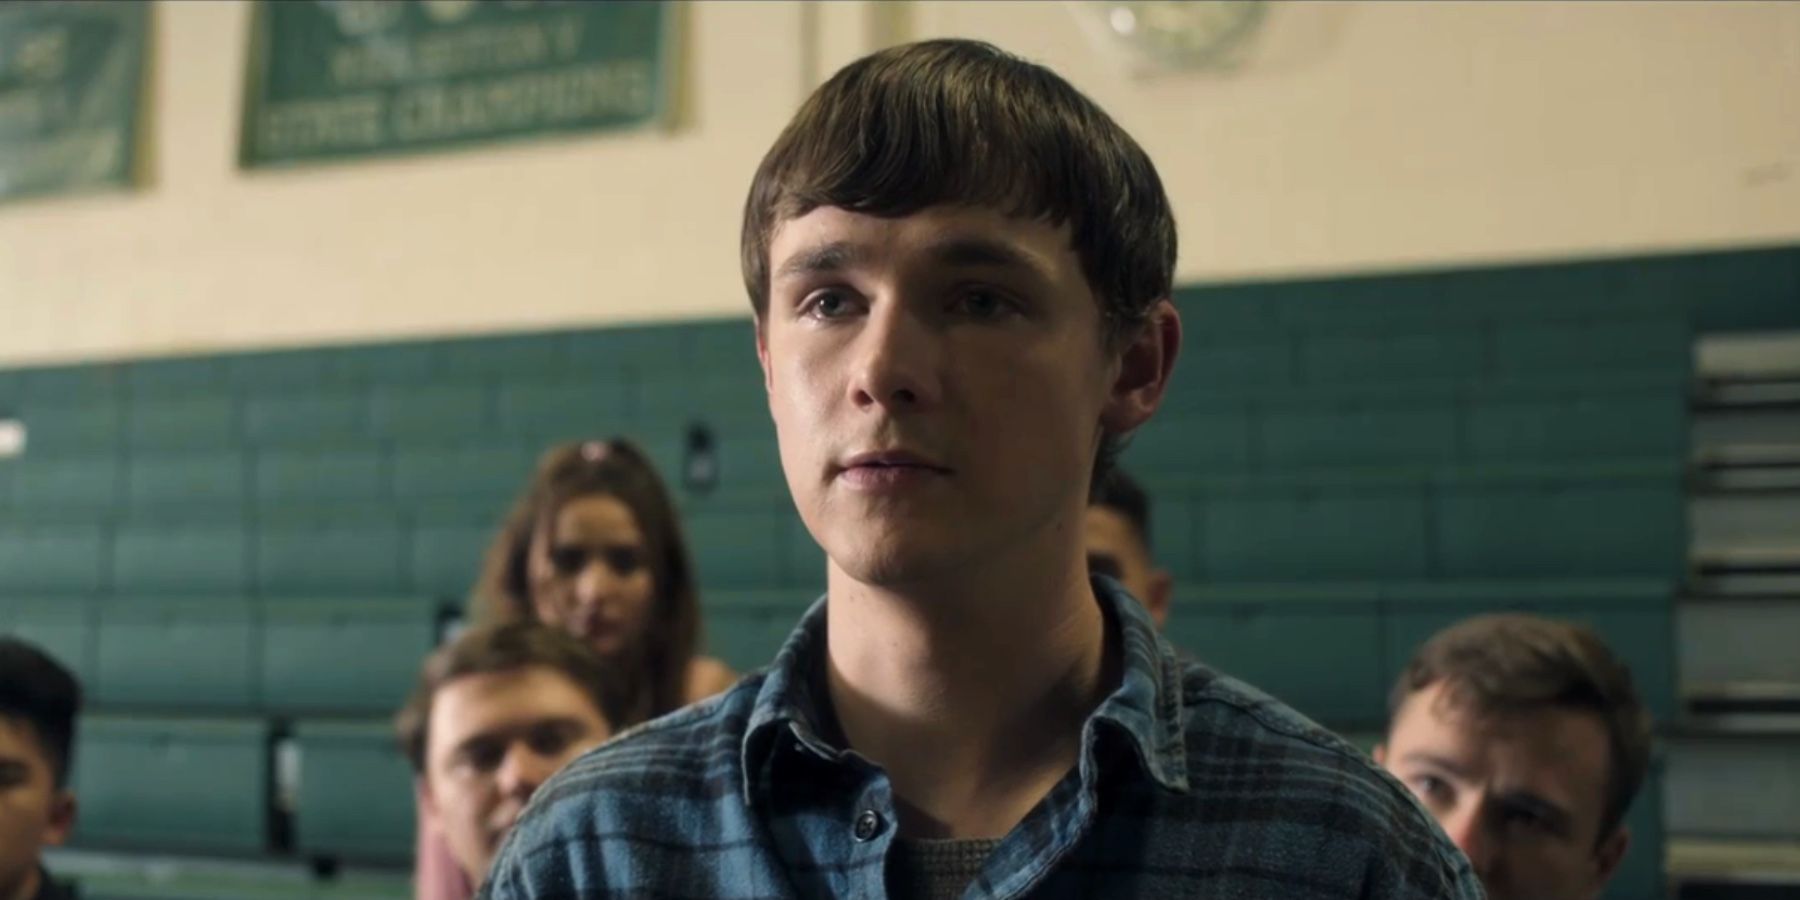 Harrison standing in the school gym assembly in a scene from Dexter: New Blood.